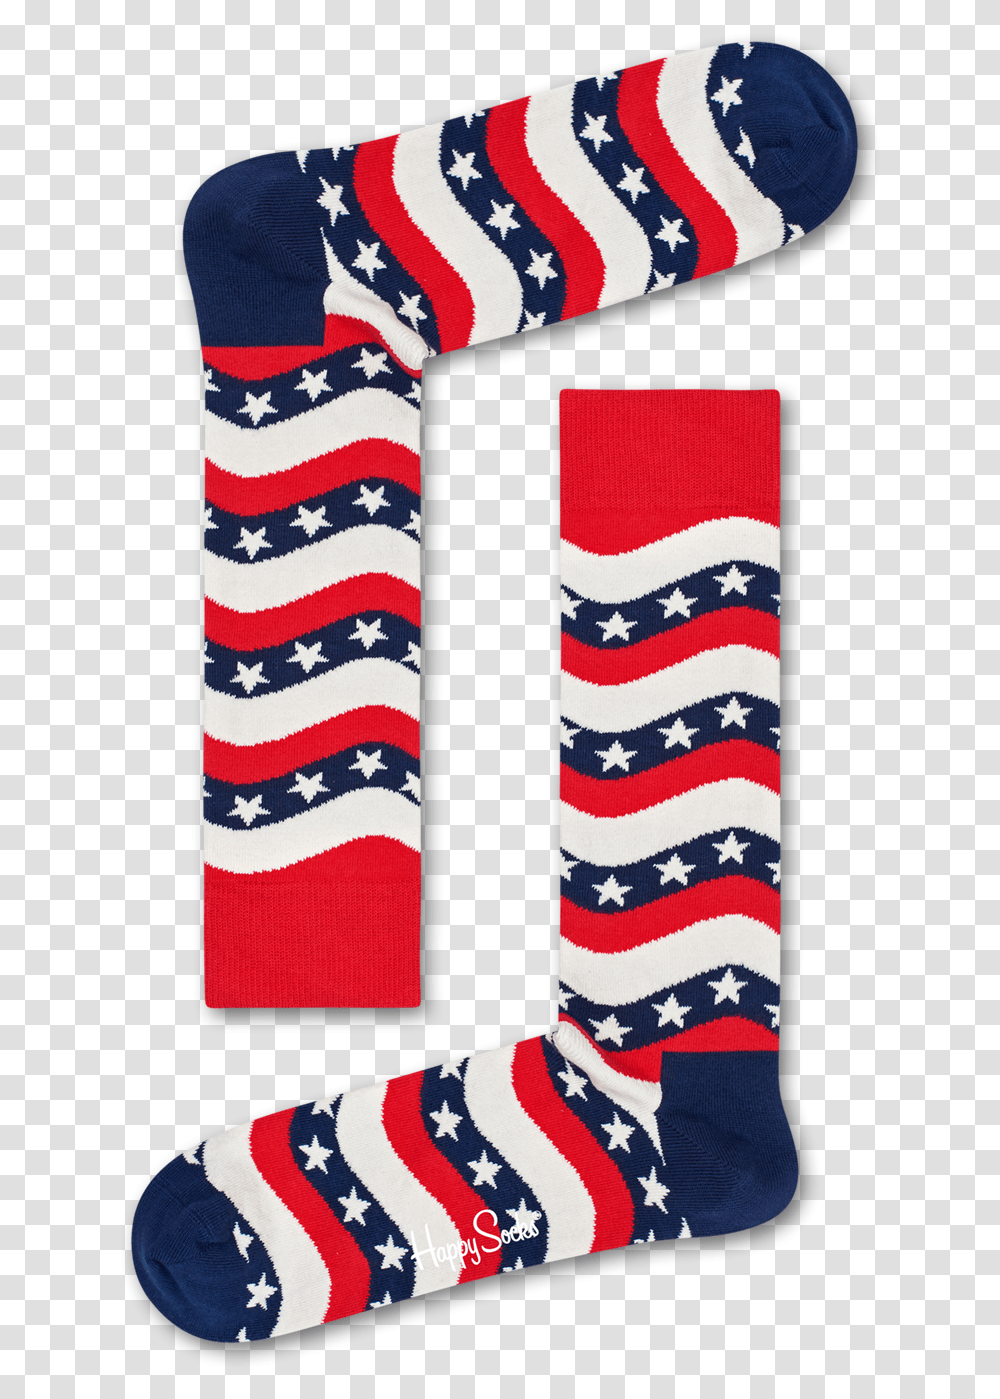 Red White And Blue Stars Wavy Stars And Stripes Sock, Clothing, Apparel, Tie, Accessories Transparent Png